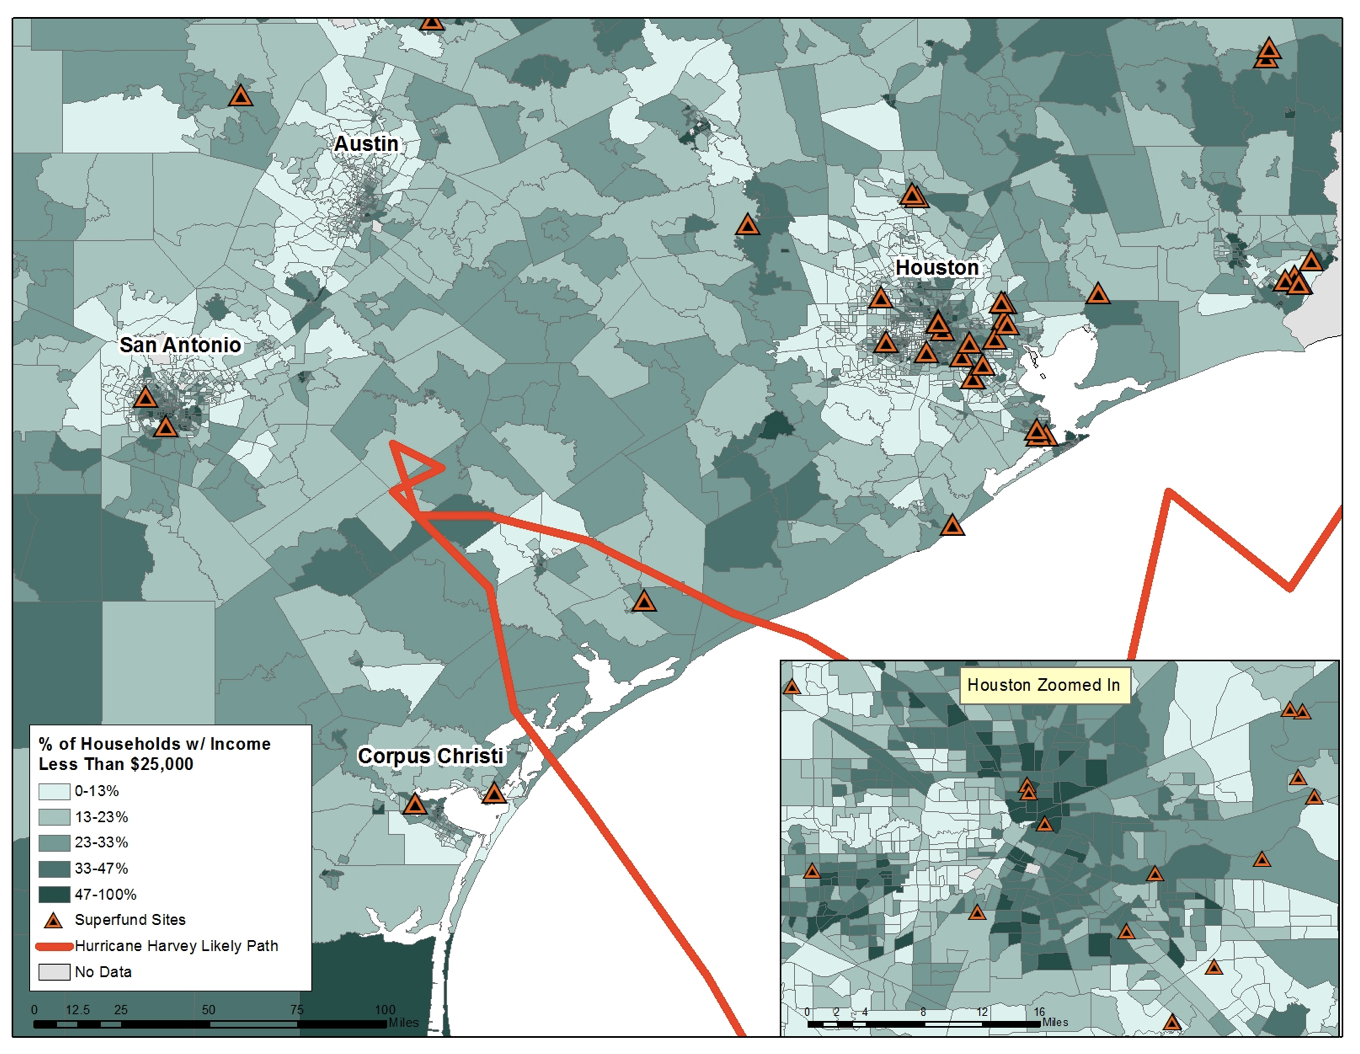 Map showing Households with Income Less Than $25,000 in relation to Superfund Sites in Houston